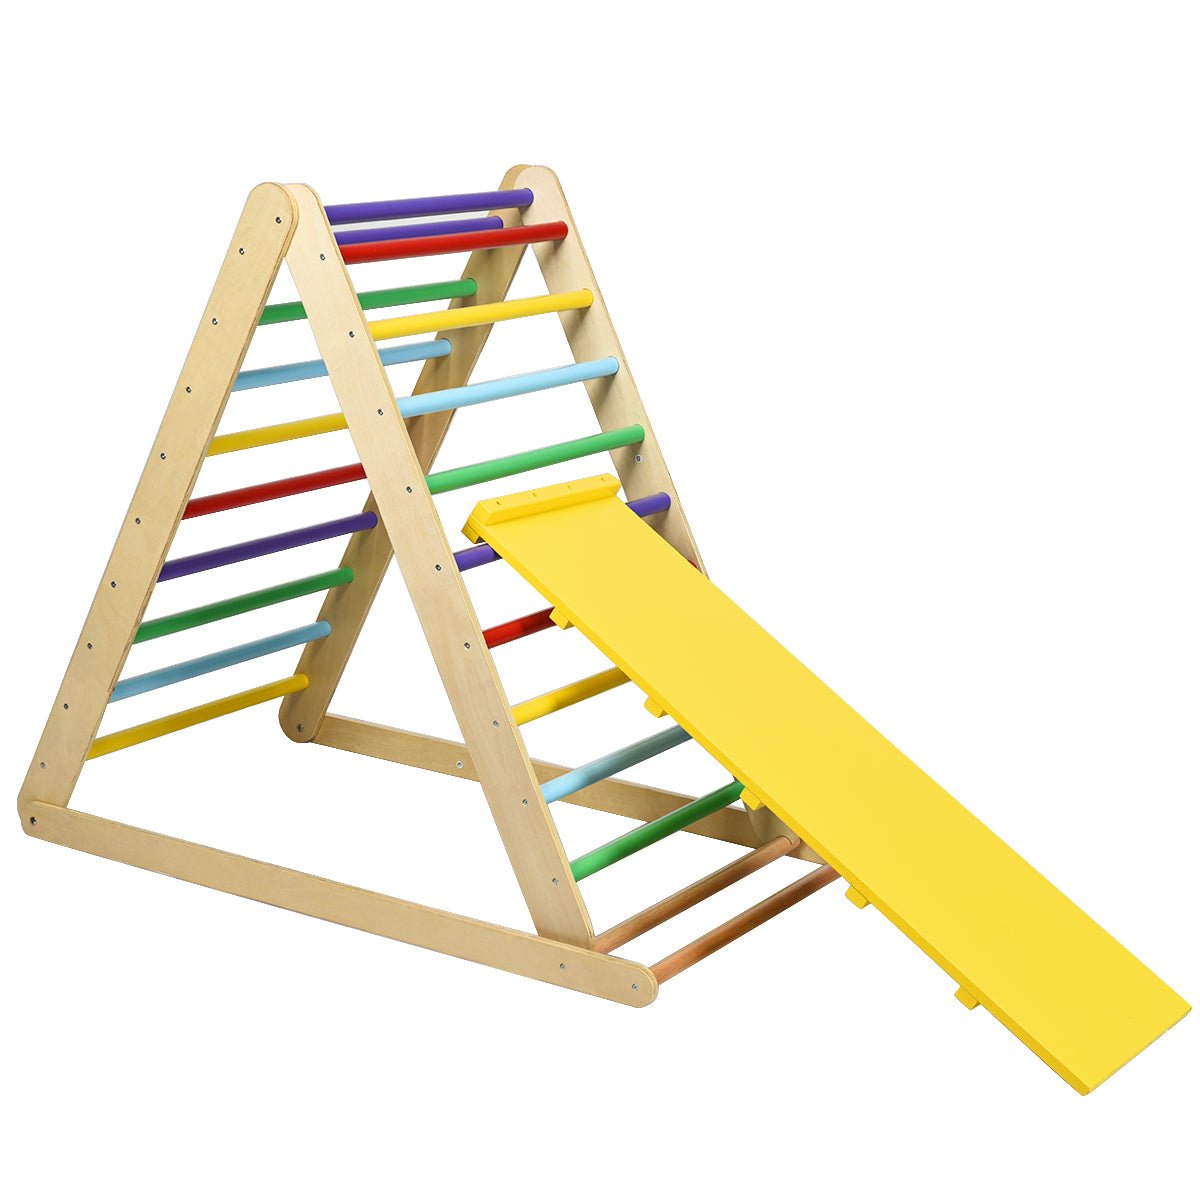 Vibrant Wooden Climbing Triangle Ladder - Triangular Safety in Multicolour Design